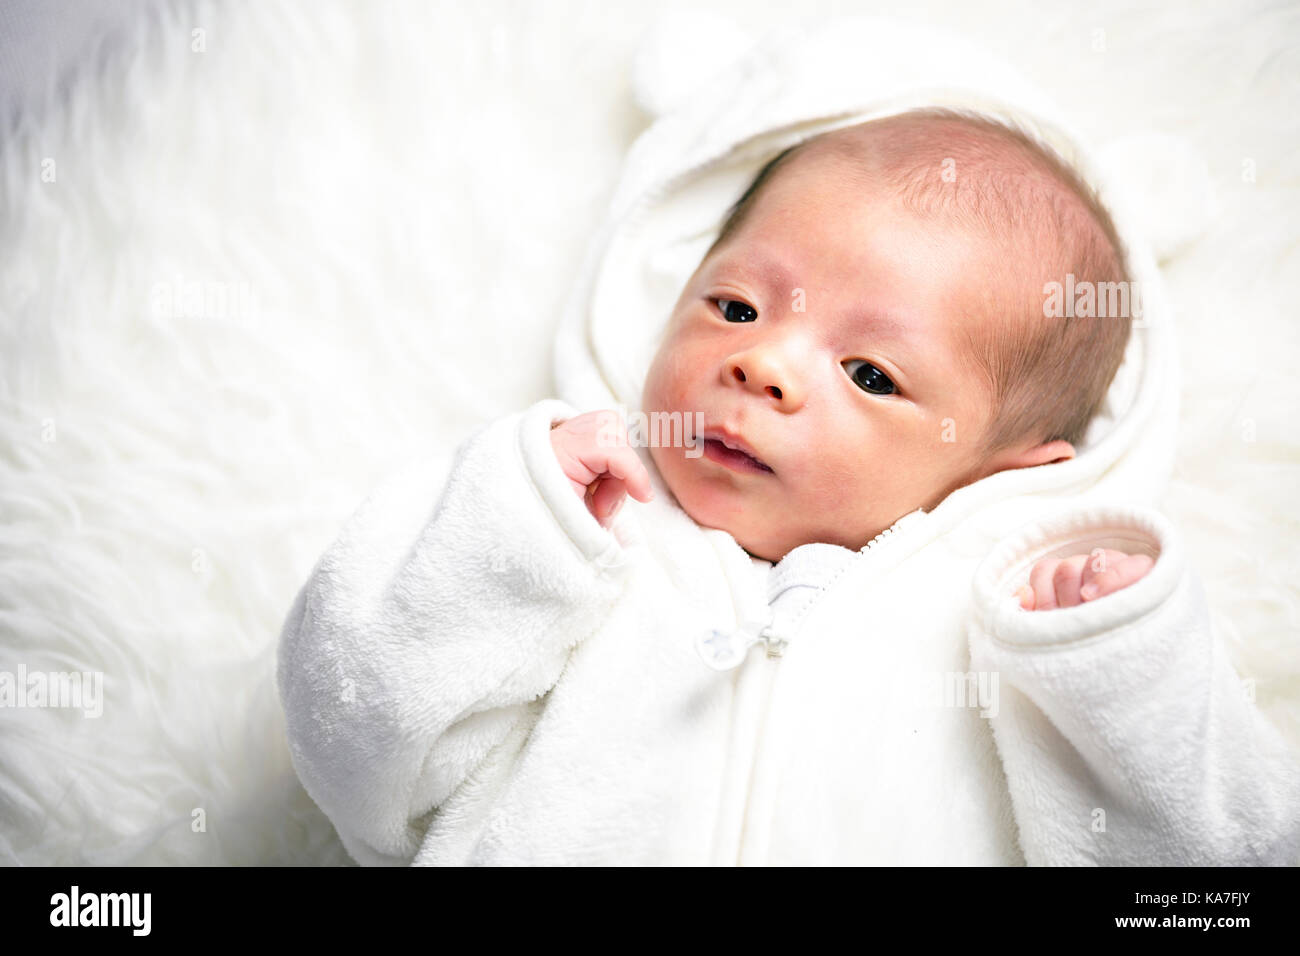 Cute little boy, one month old, in white dress Stock Photo